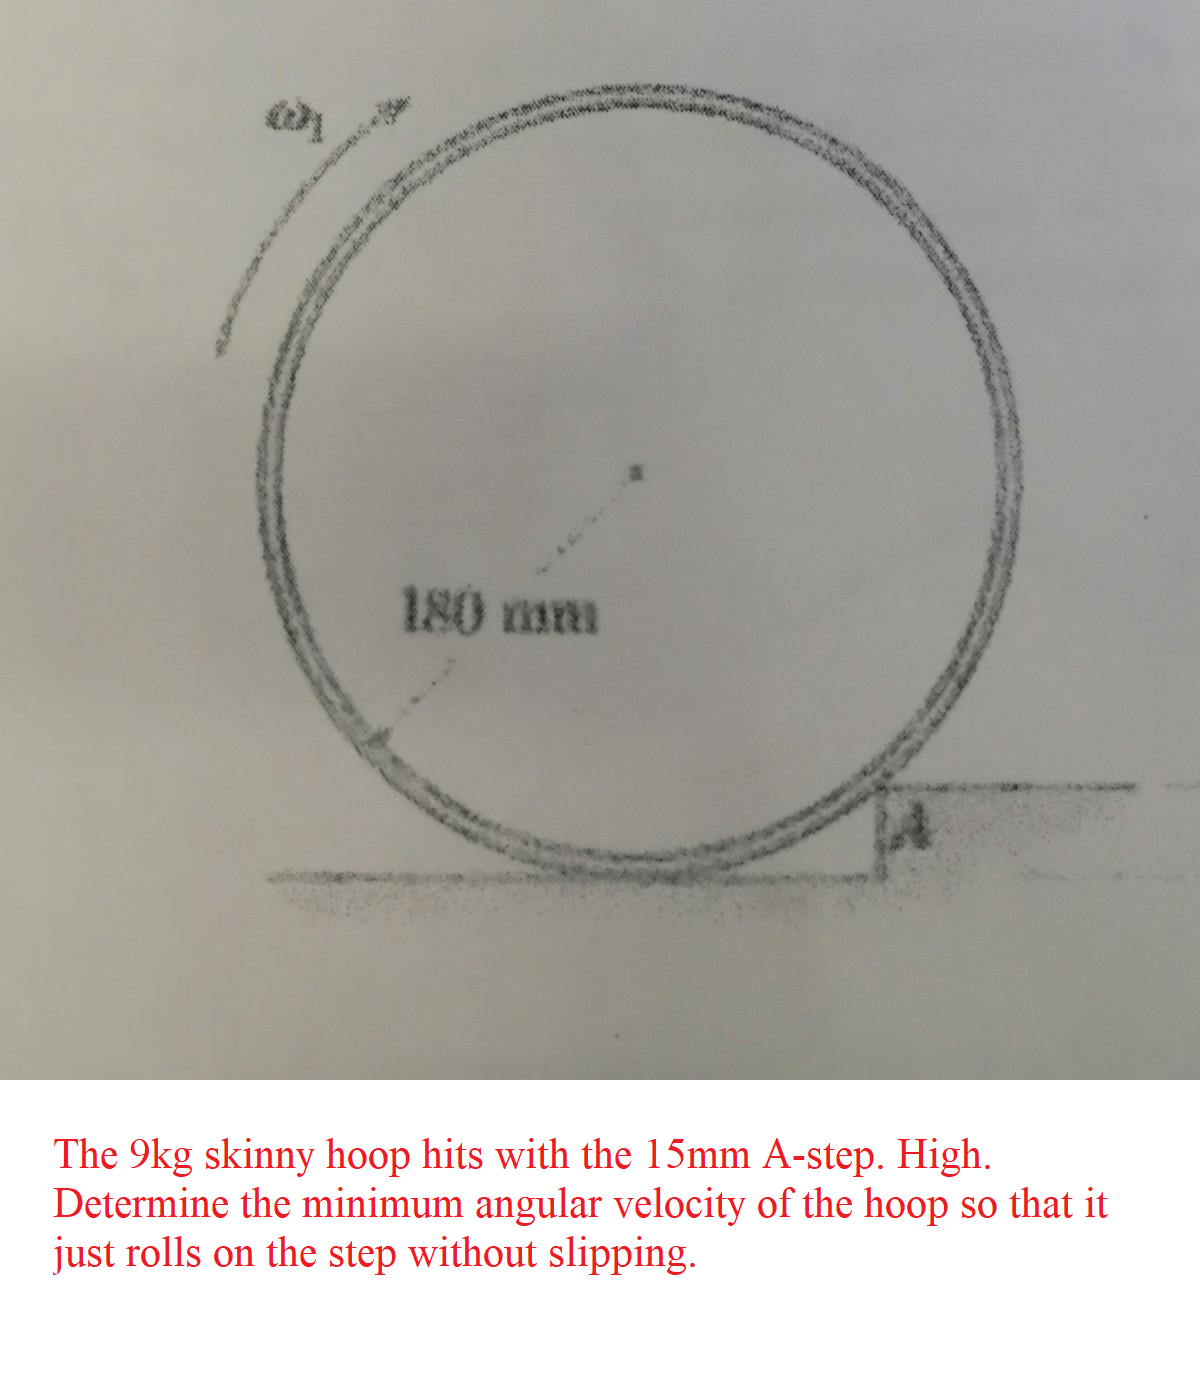 180 mm
The 9kg skinny hoop hits with the 15mm A-step. High.
Determine the minimum angular velocity of the hoop so that it
just rolls on the step without slipping.